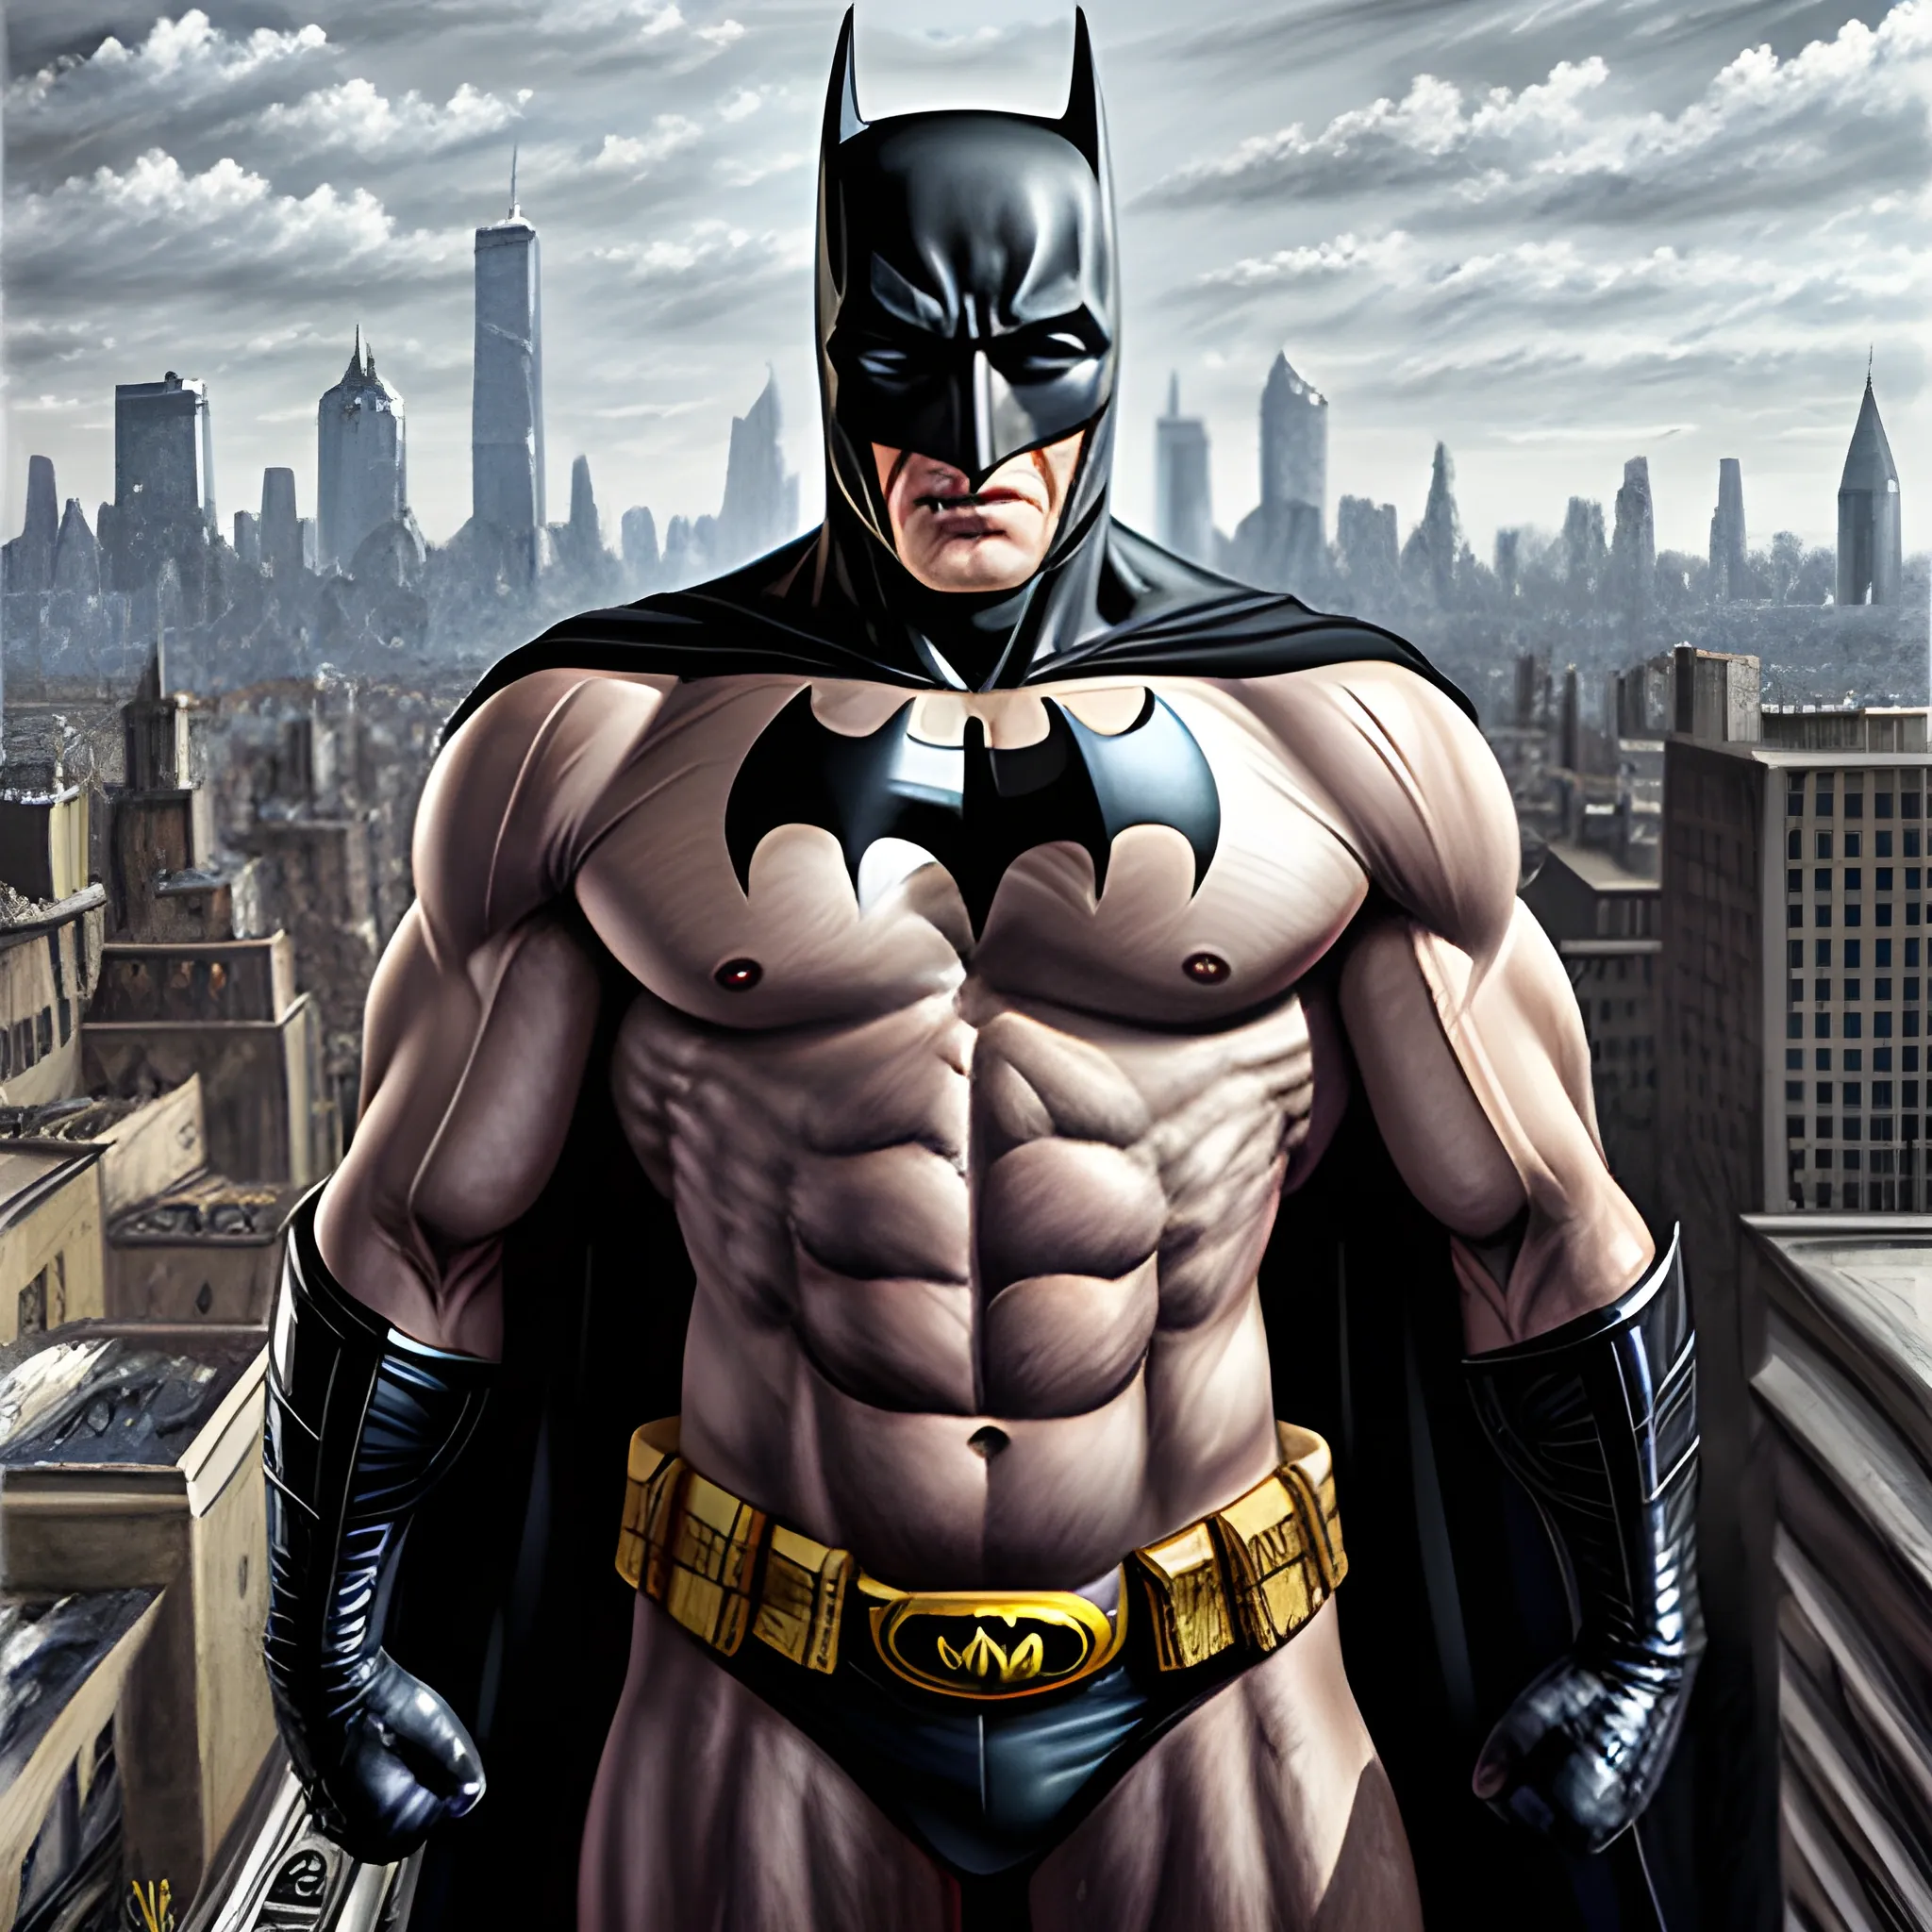 muscular Batman without a mask, high-quality high detailed painting by Lucian Freud, hd, photorealistic lighting, full body, Gotham city rooftop